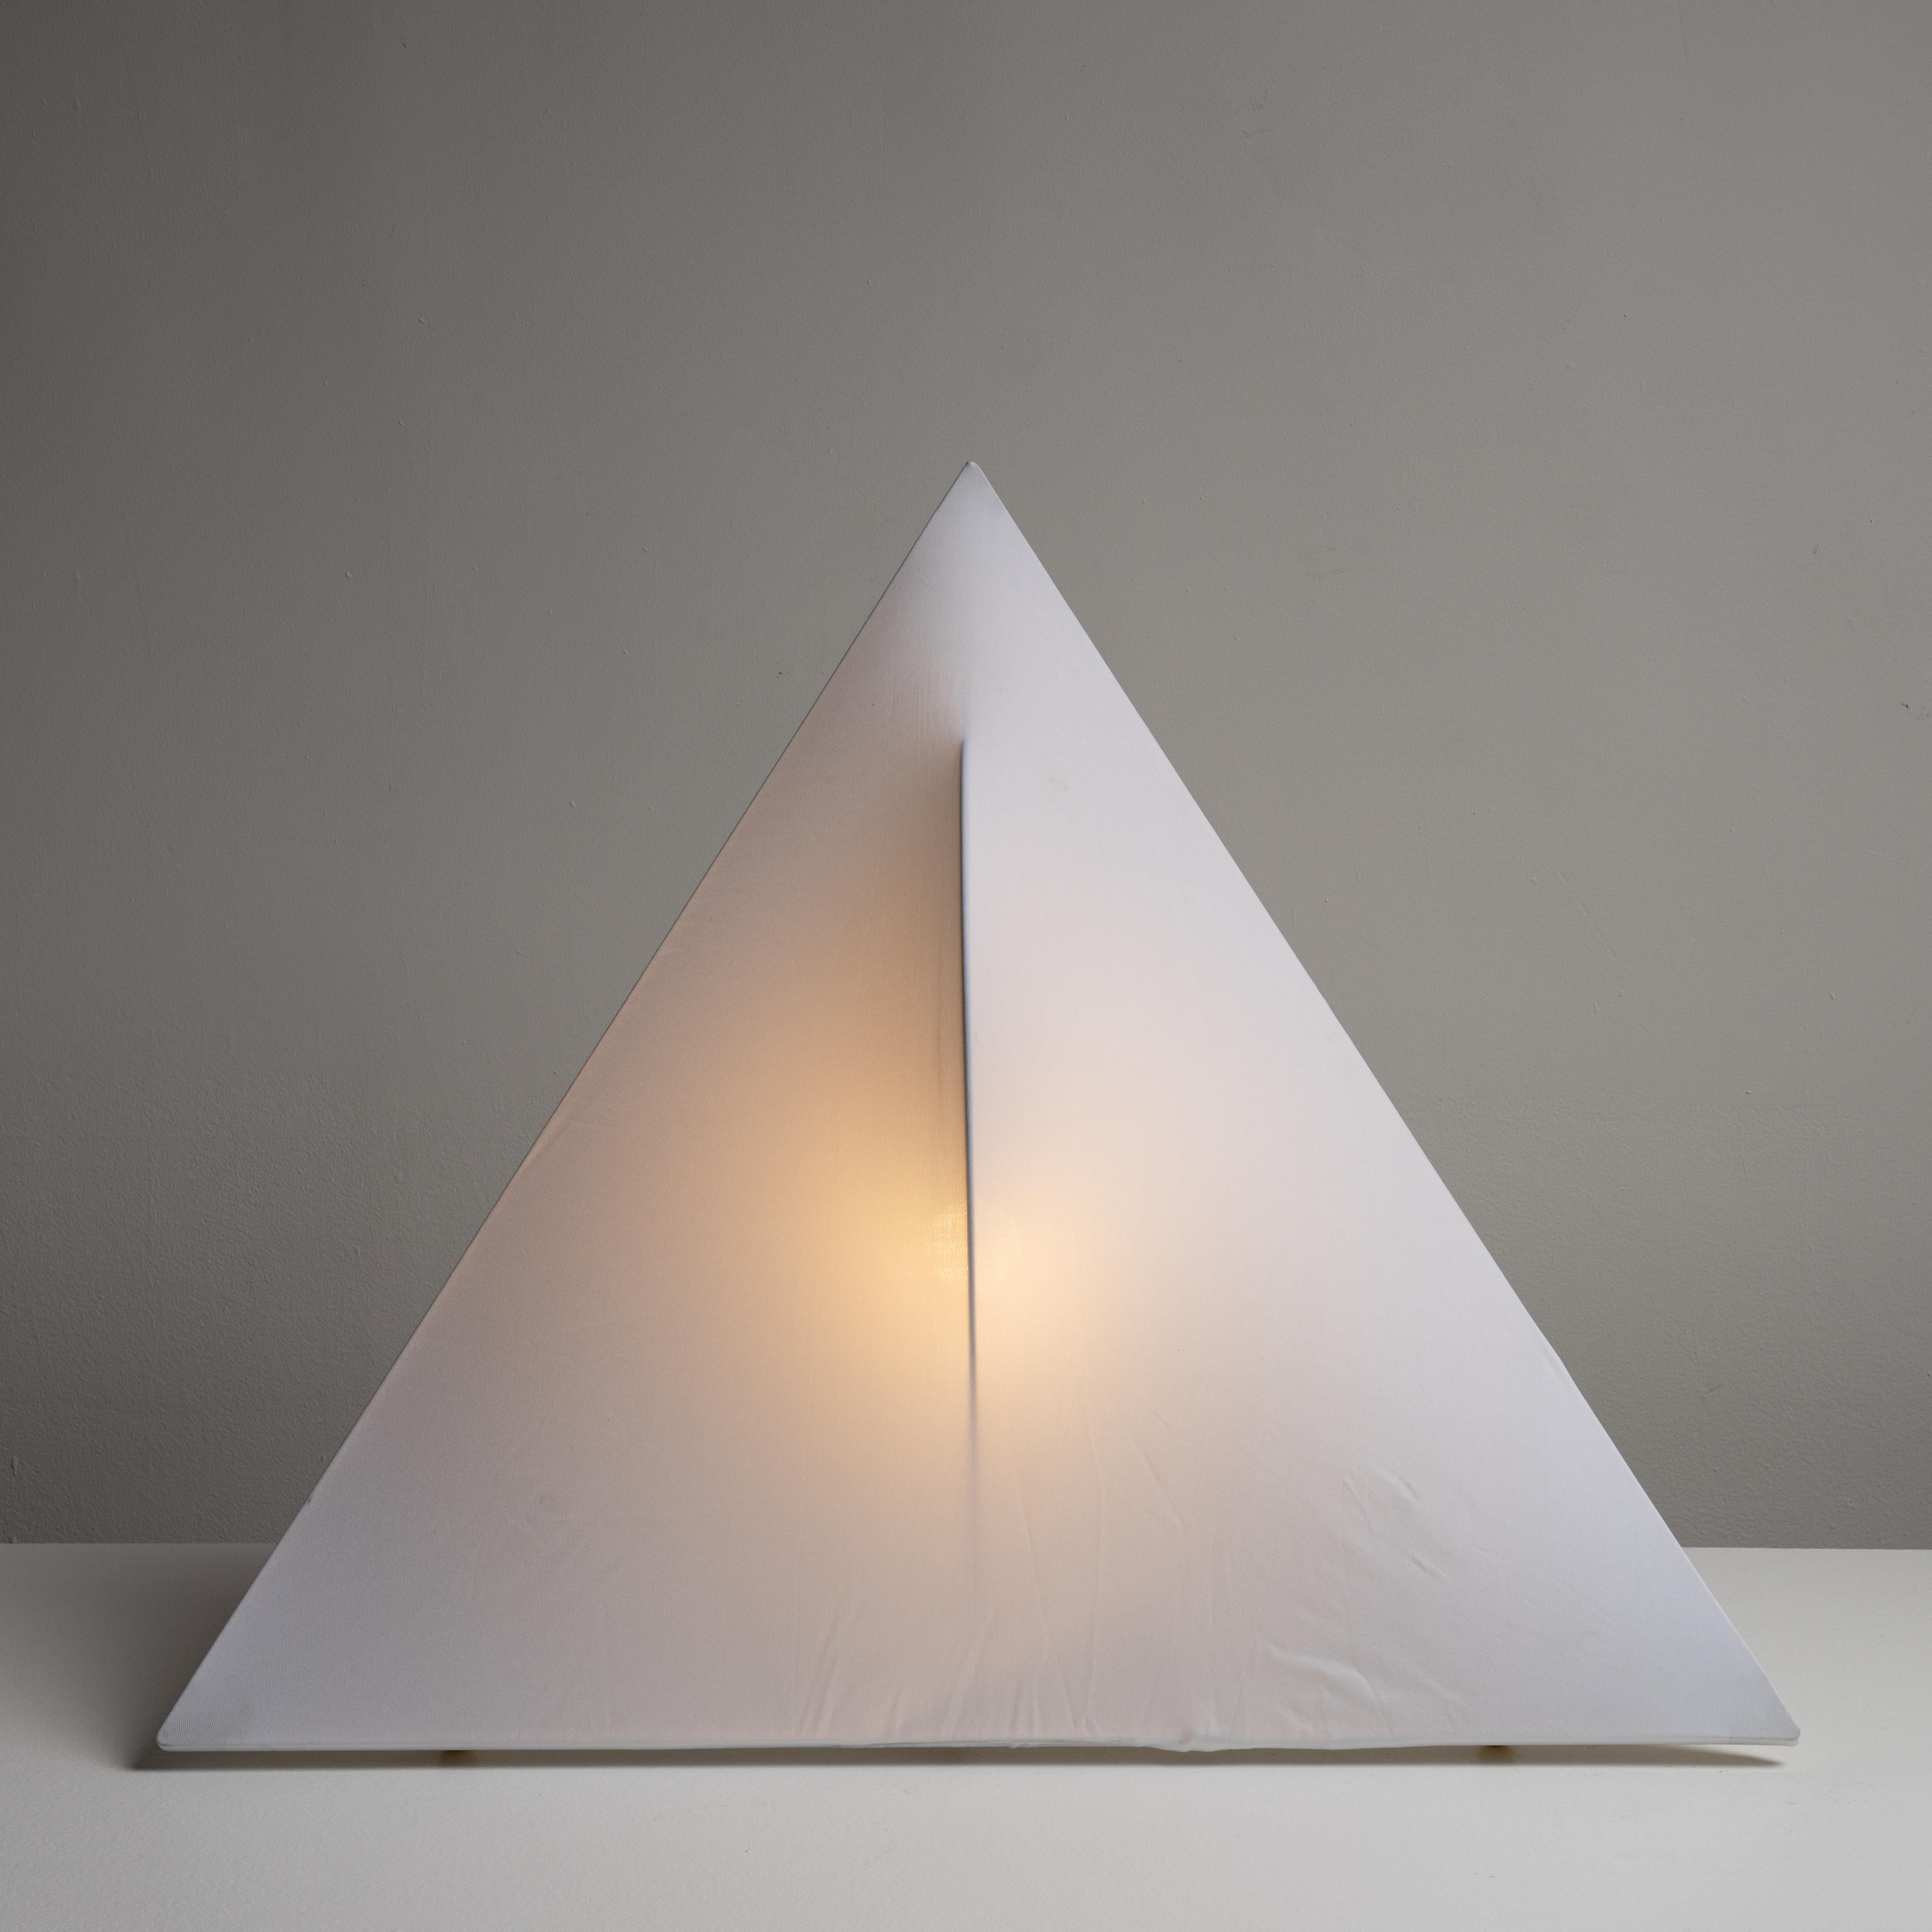 Sanka Table or Floor Lamp by Kazuhide Takahama for Sirrah. Designed and manufactured in Italy, circa the 1970s. Dead-stock from Sirrah. Triangular plastic frame and stretch fabric cloth diffuser. The lights hold a single E27 socket type, adapted for